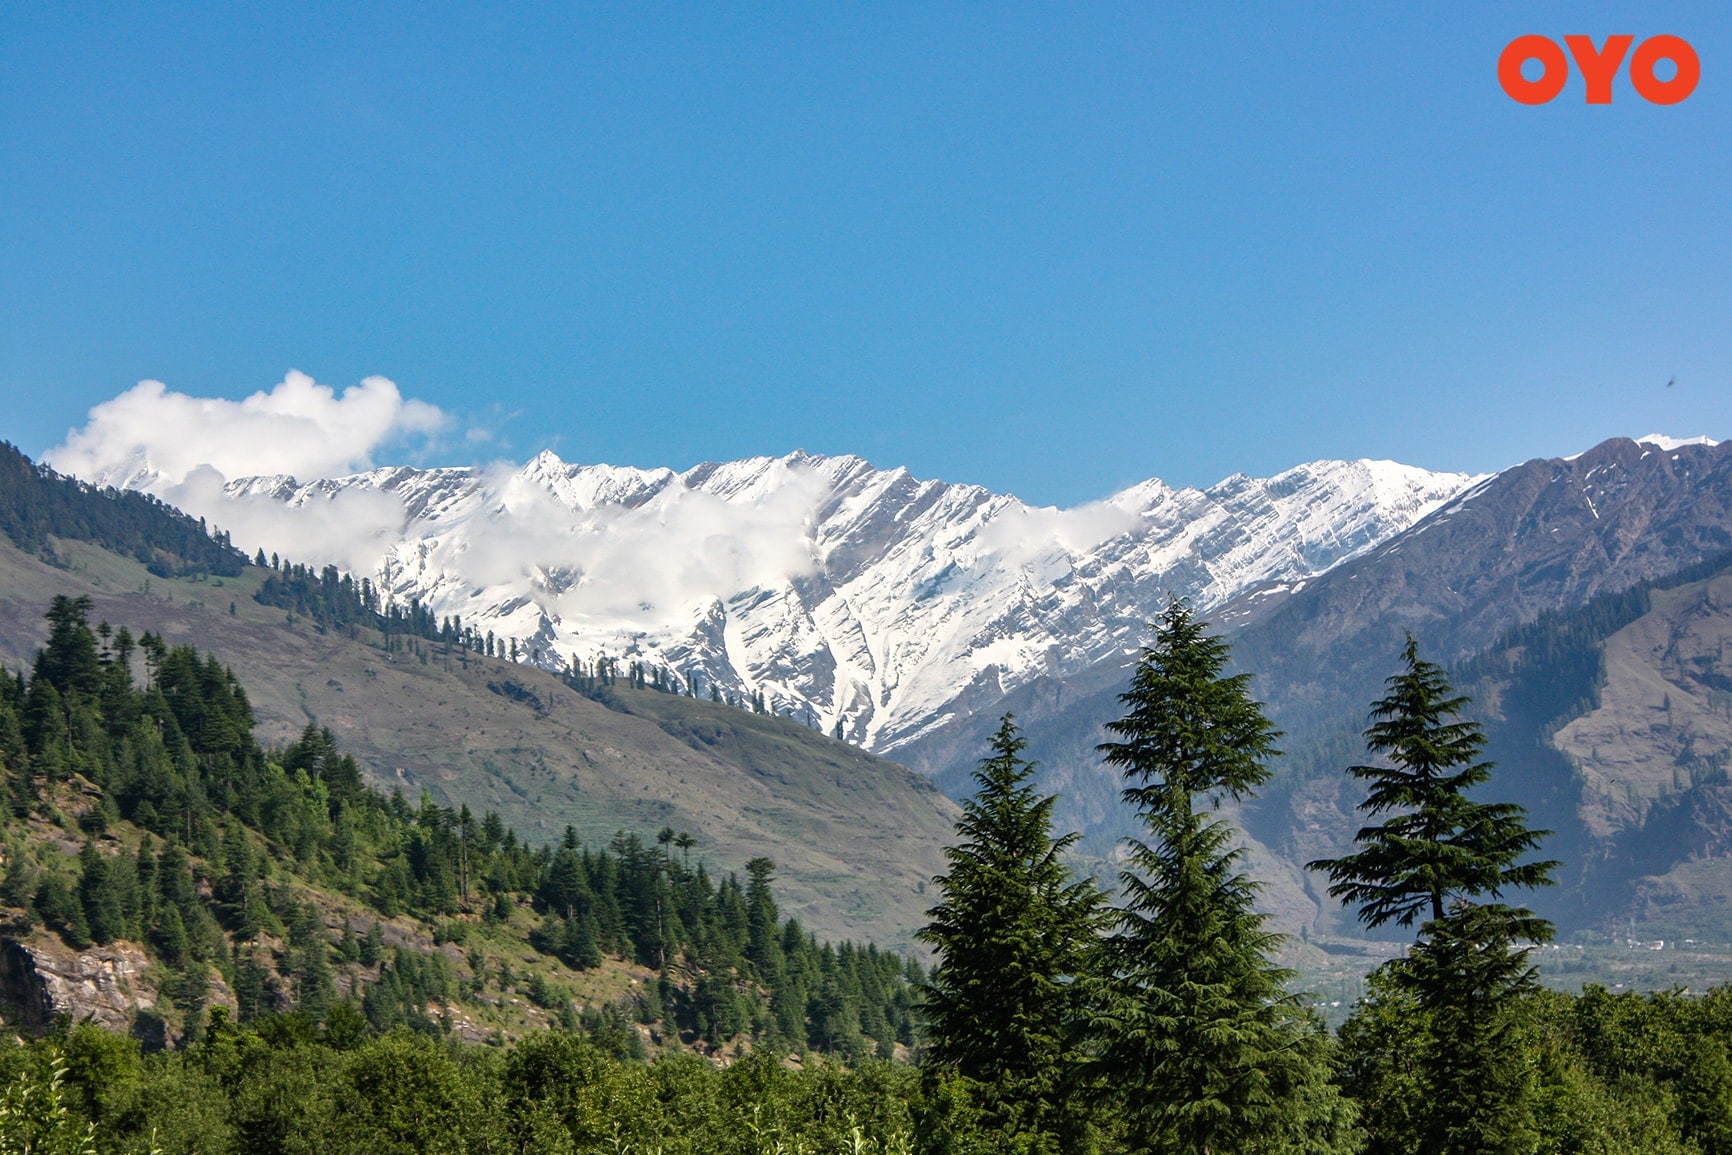 Manali- One of the Best Weekend Getaways from Chandigarh within 300 kms